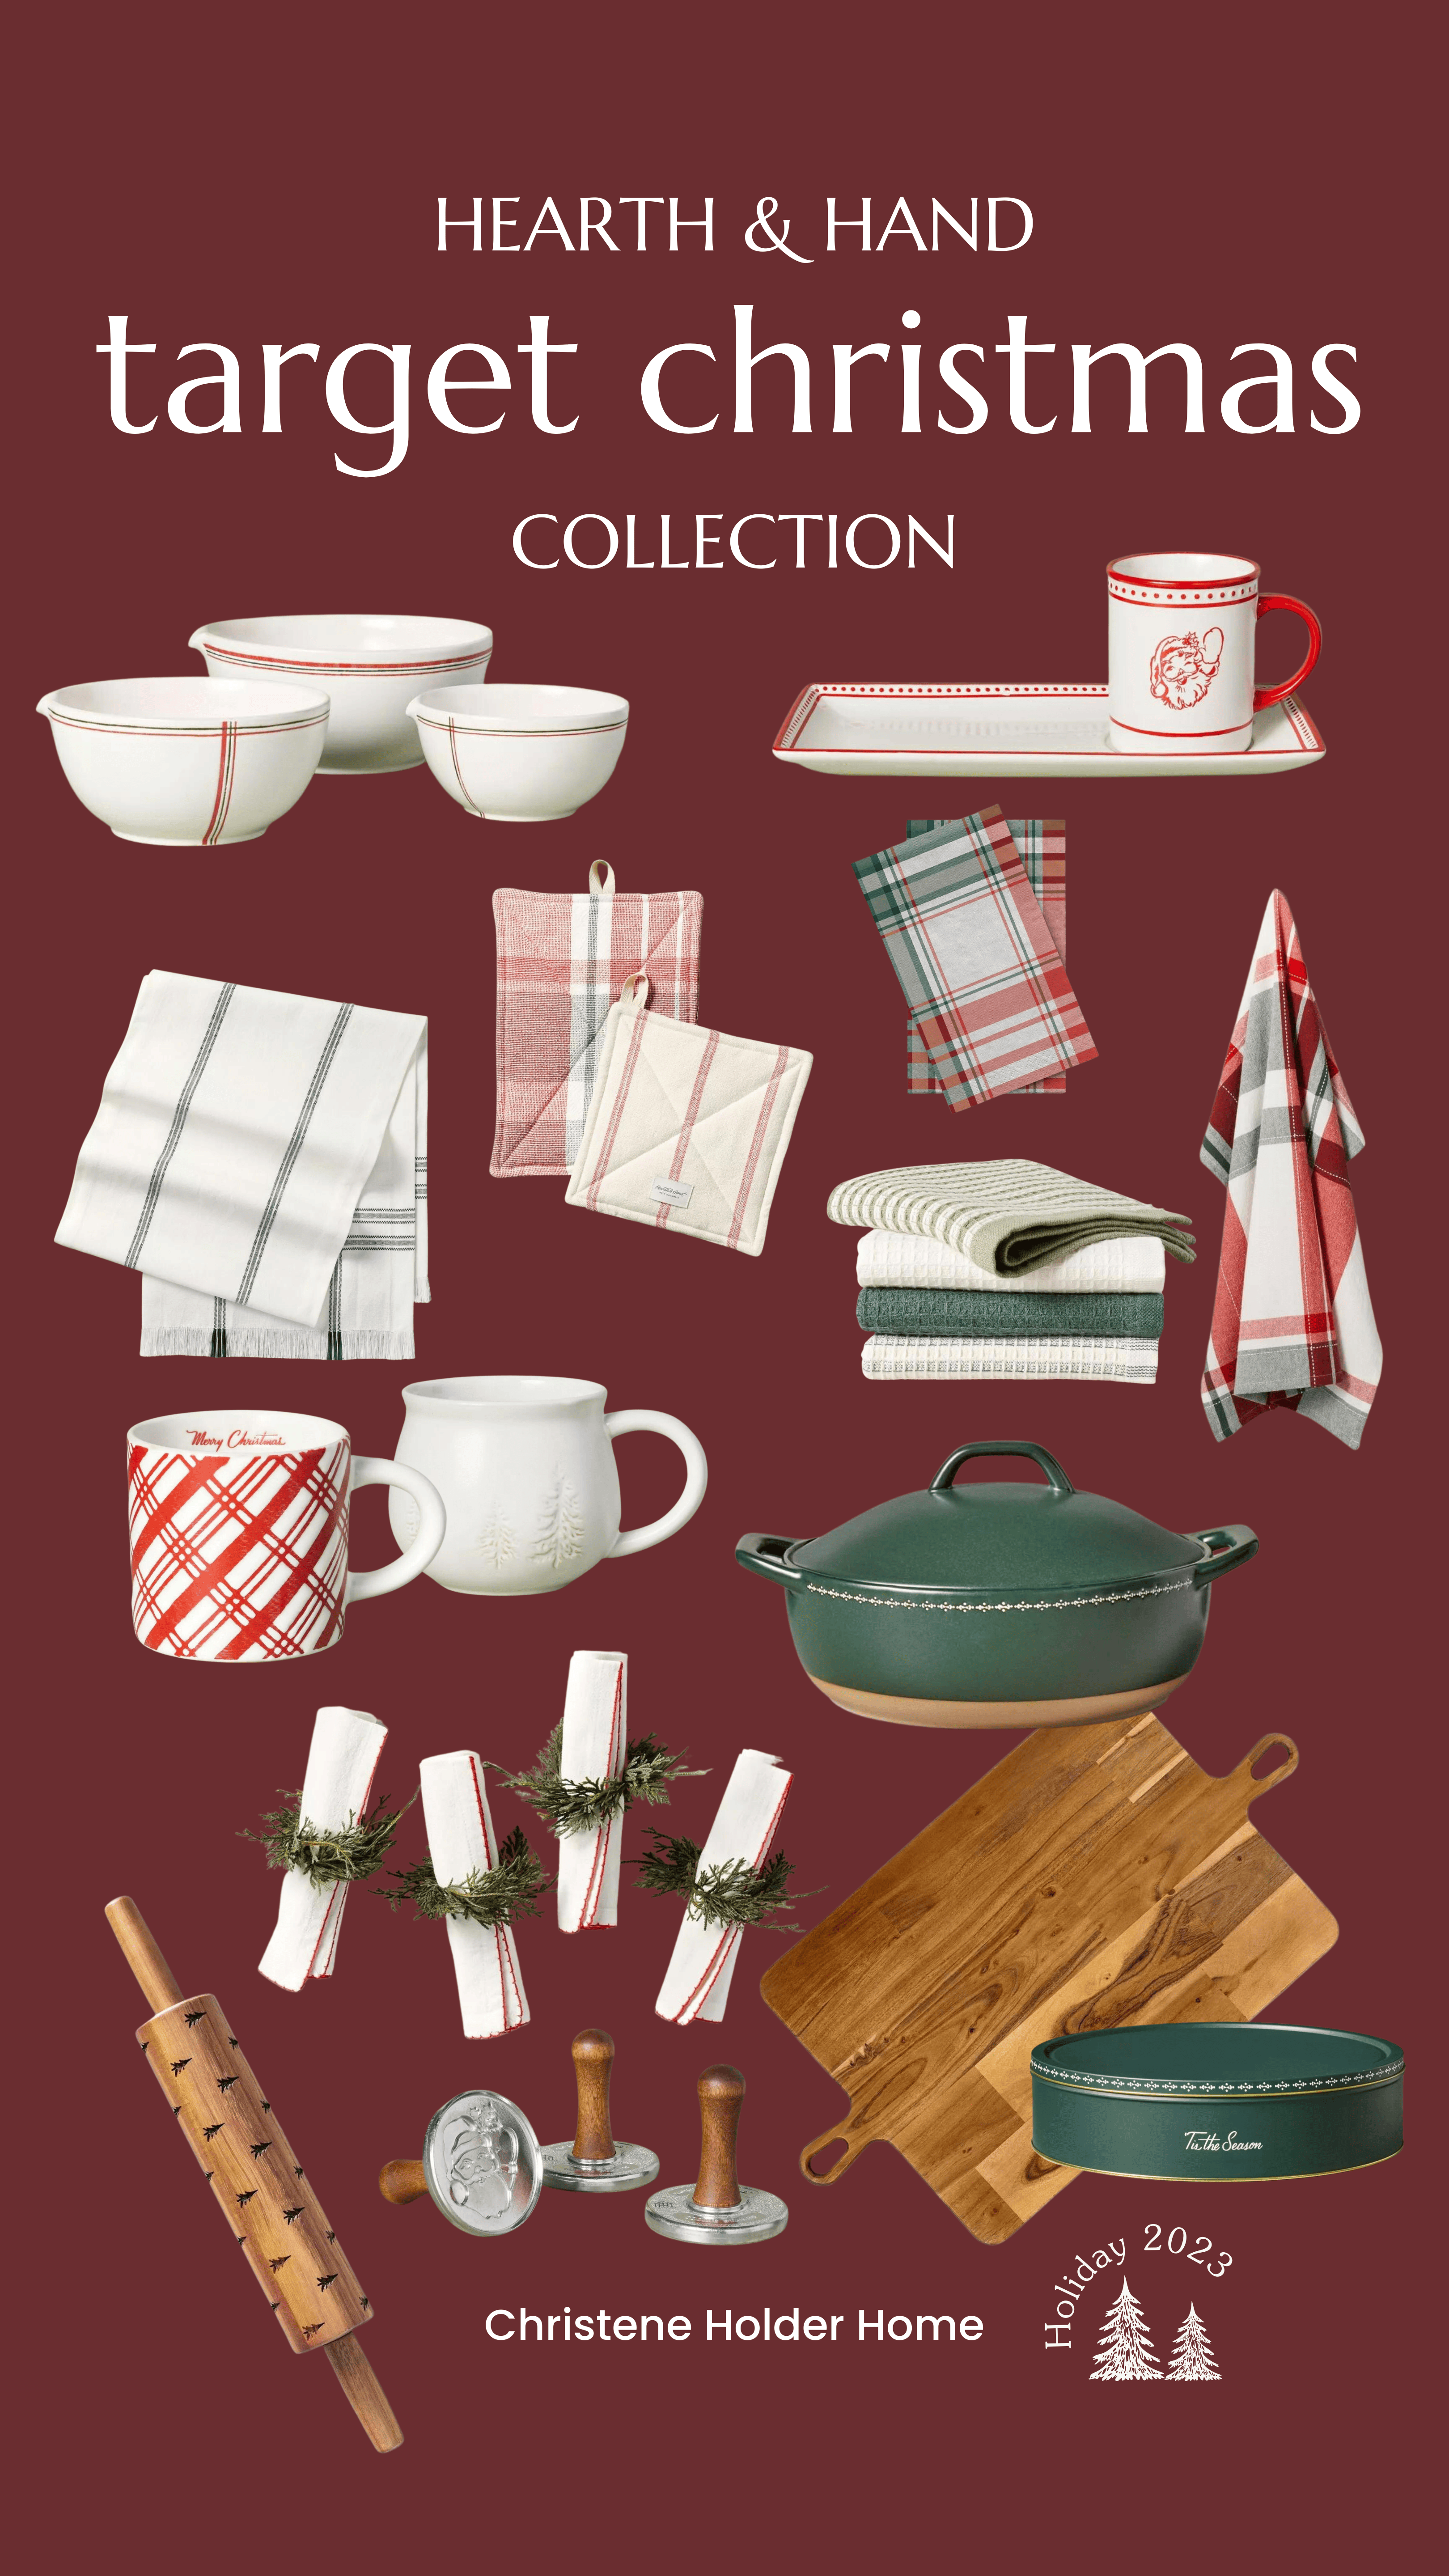 hearth and hand target christmas collection kitchen items, entertaining, and baking